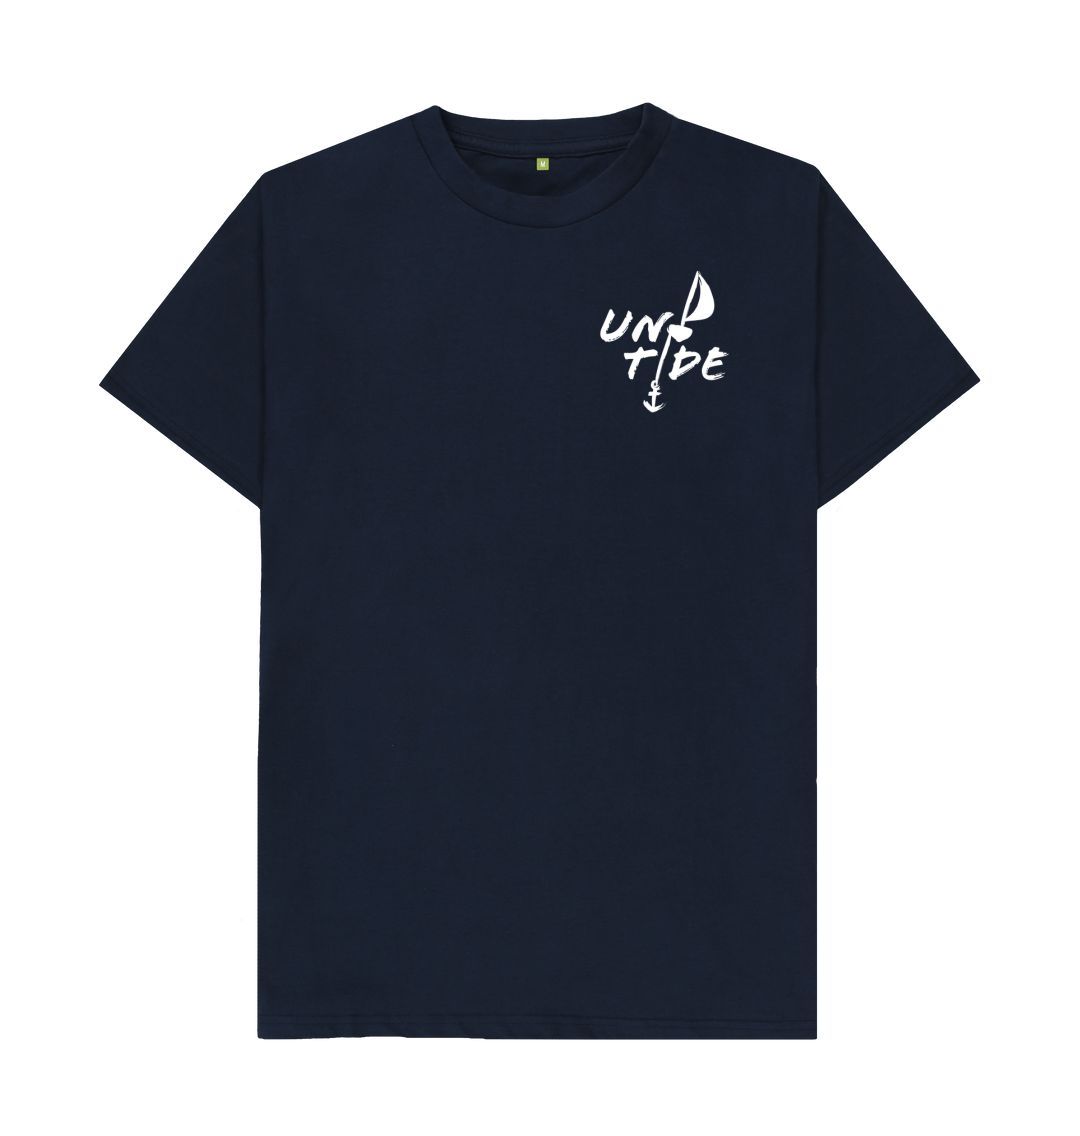 Navy Blue Untide Classic Tee